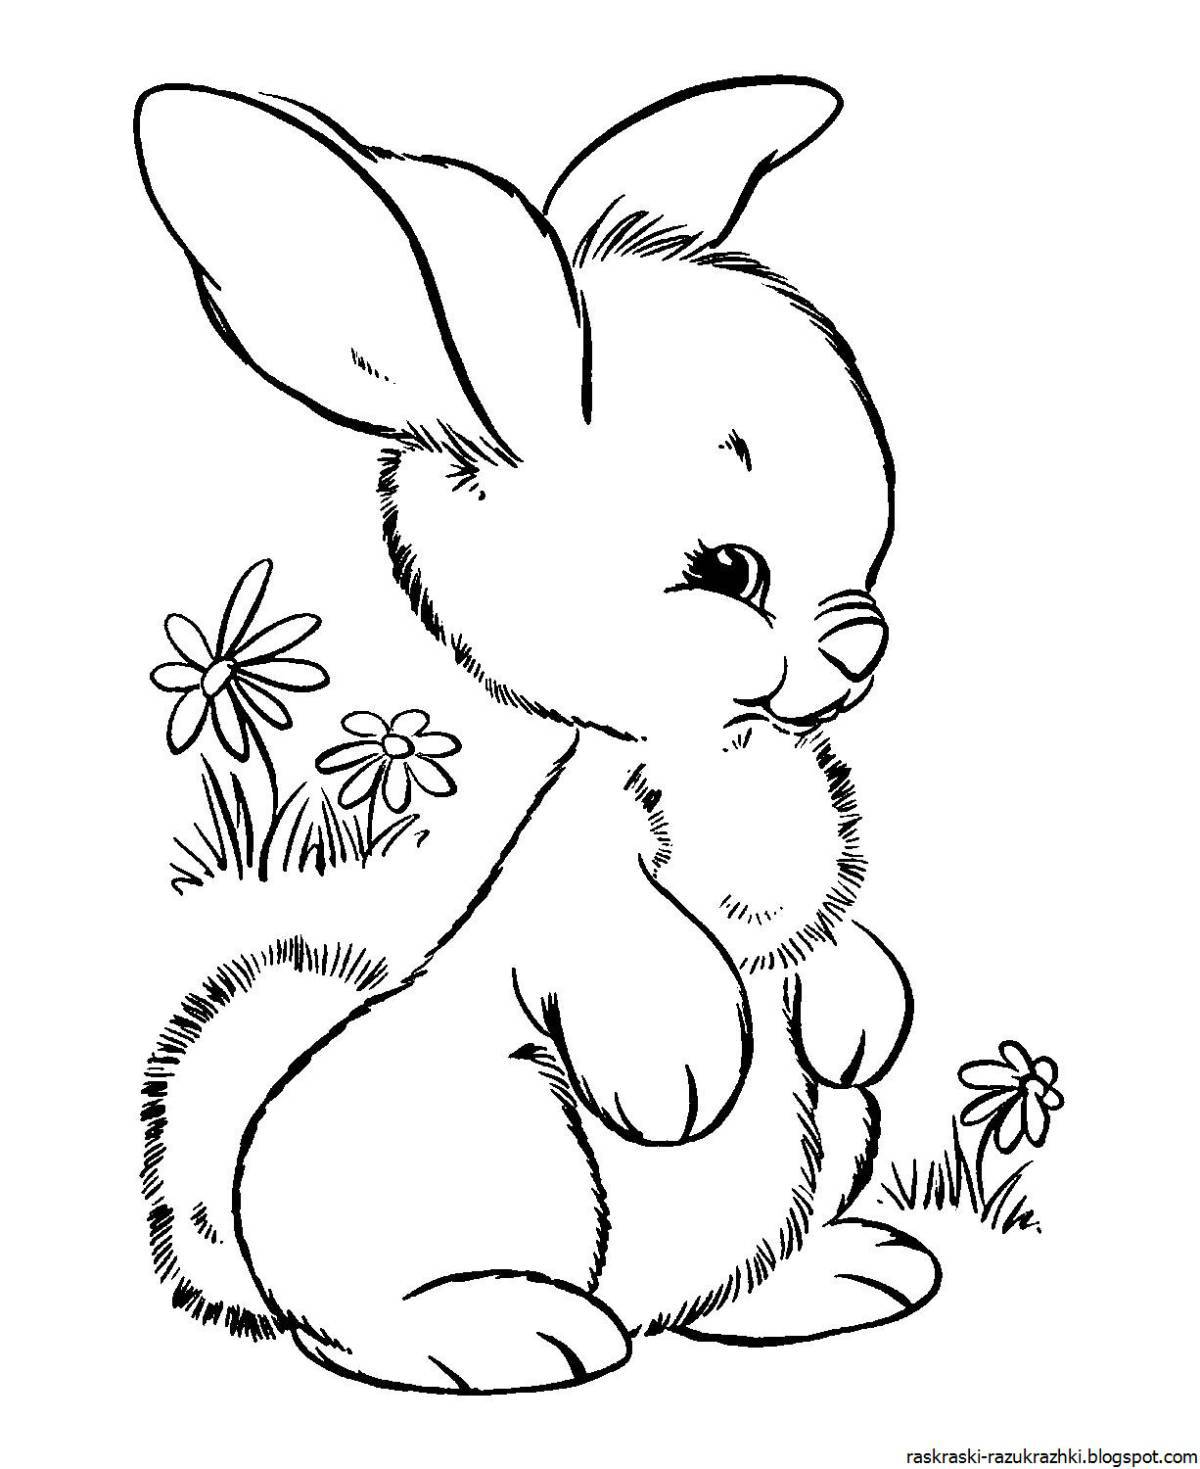 Busy coloring rabbit